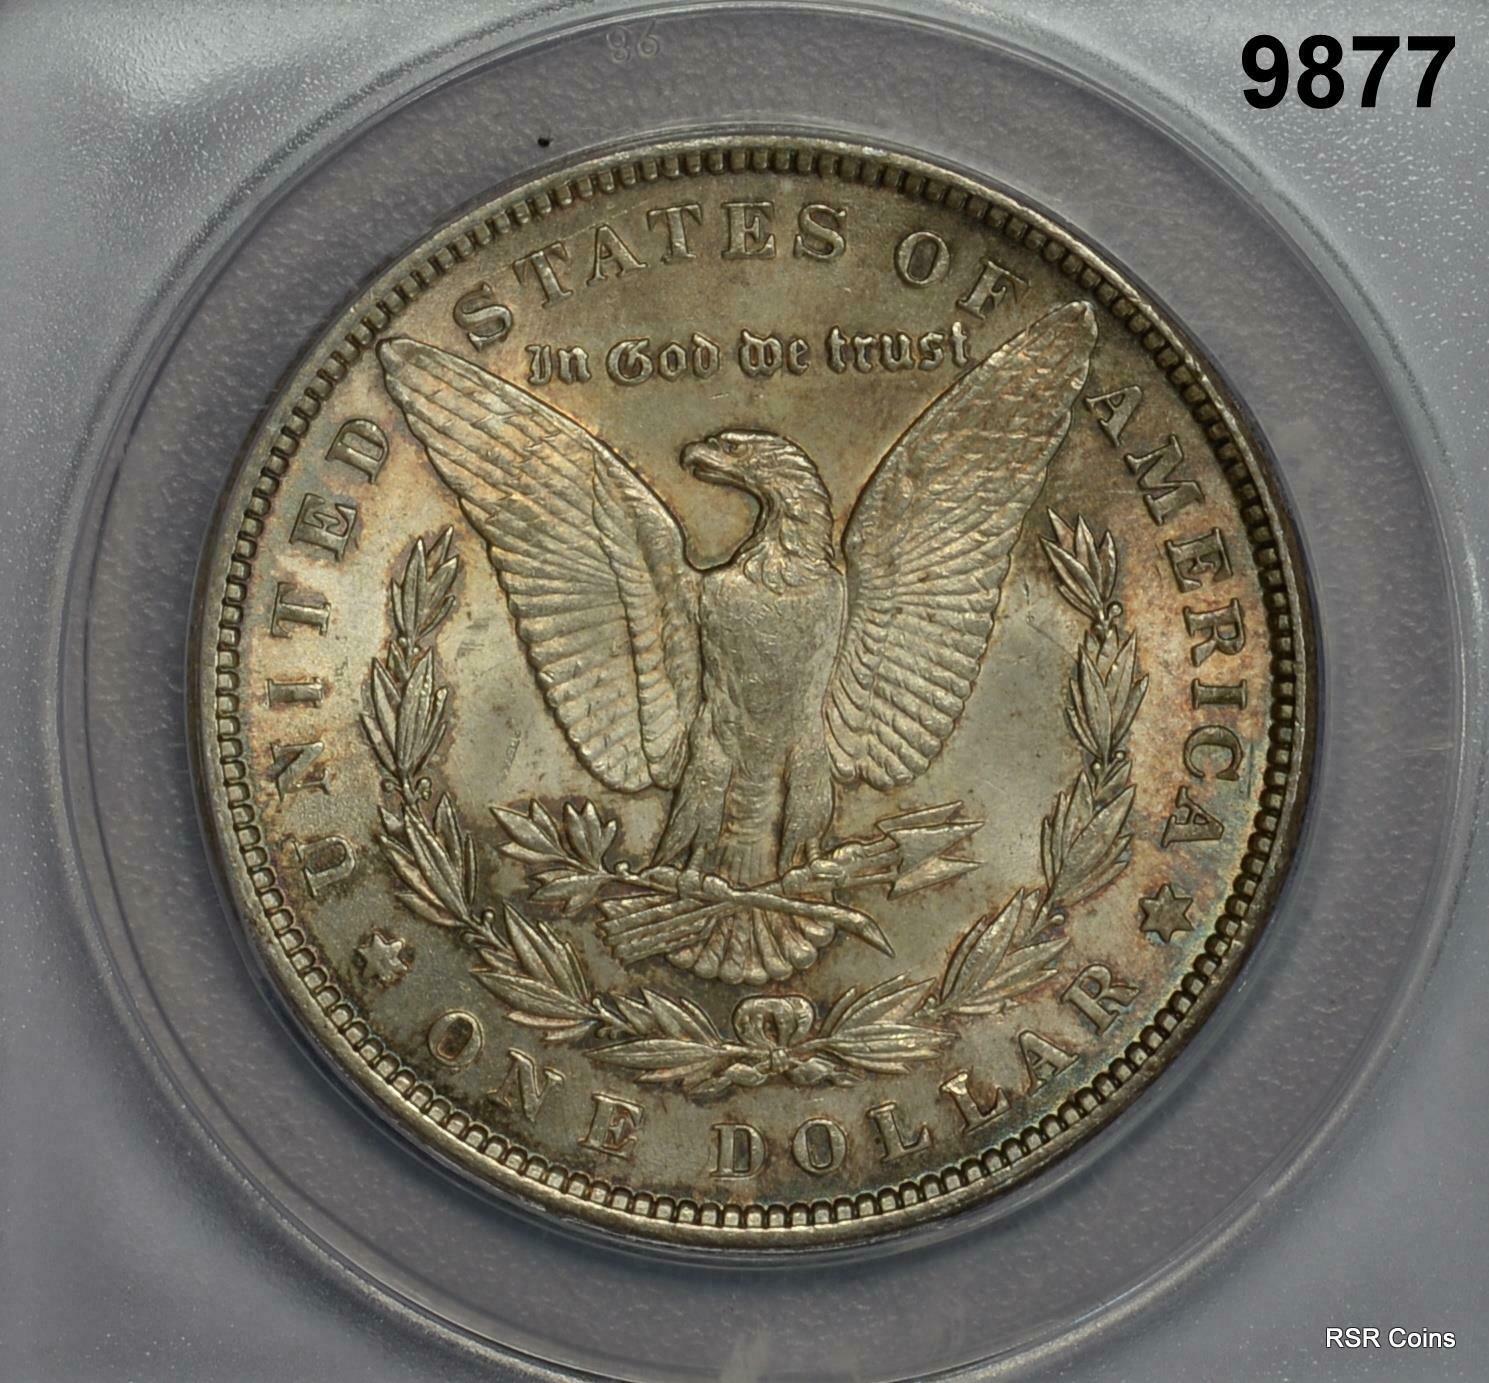 1889 MORGAN SILVER DOLLAR AMBER BLUE TONED! ANACS CERTIFIED MS63 #9877